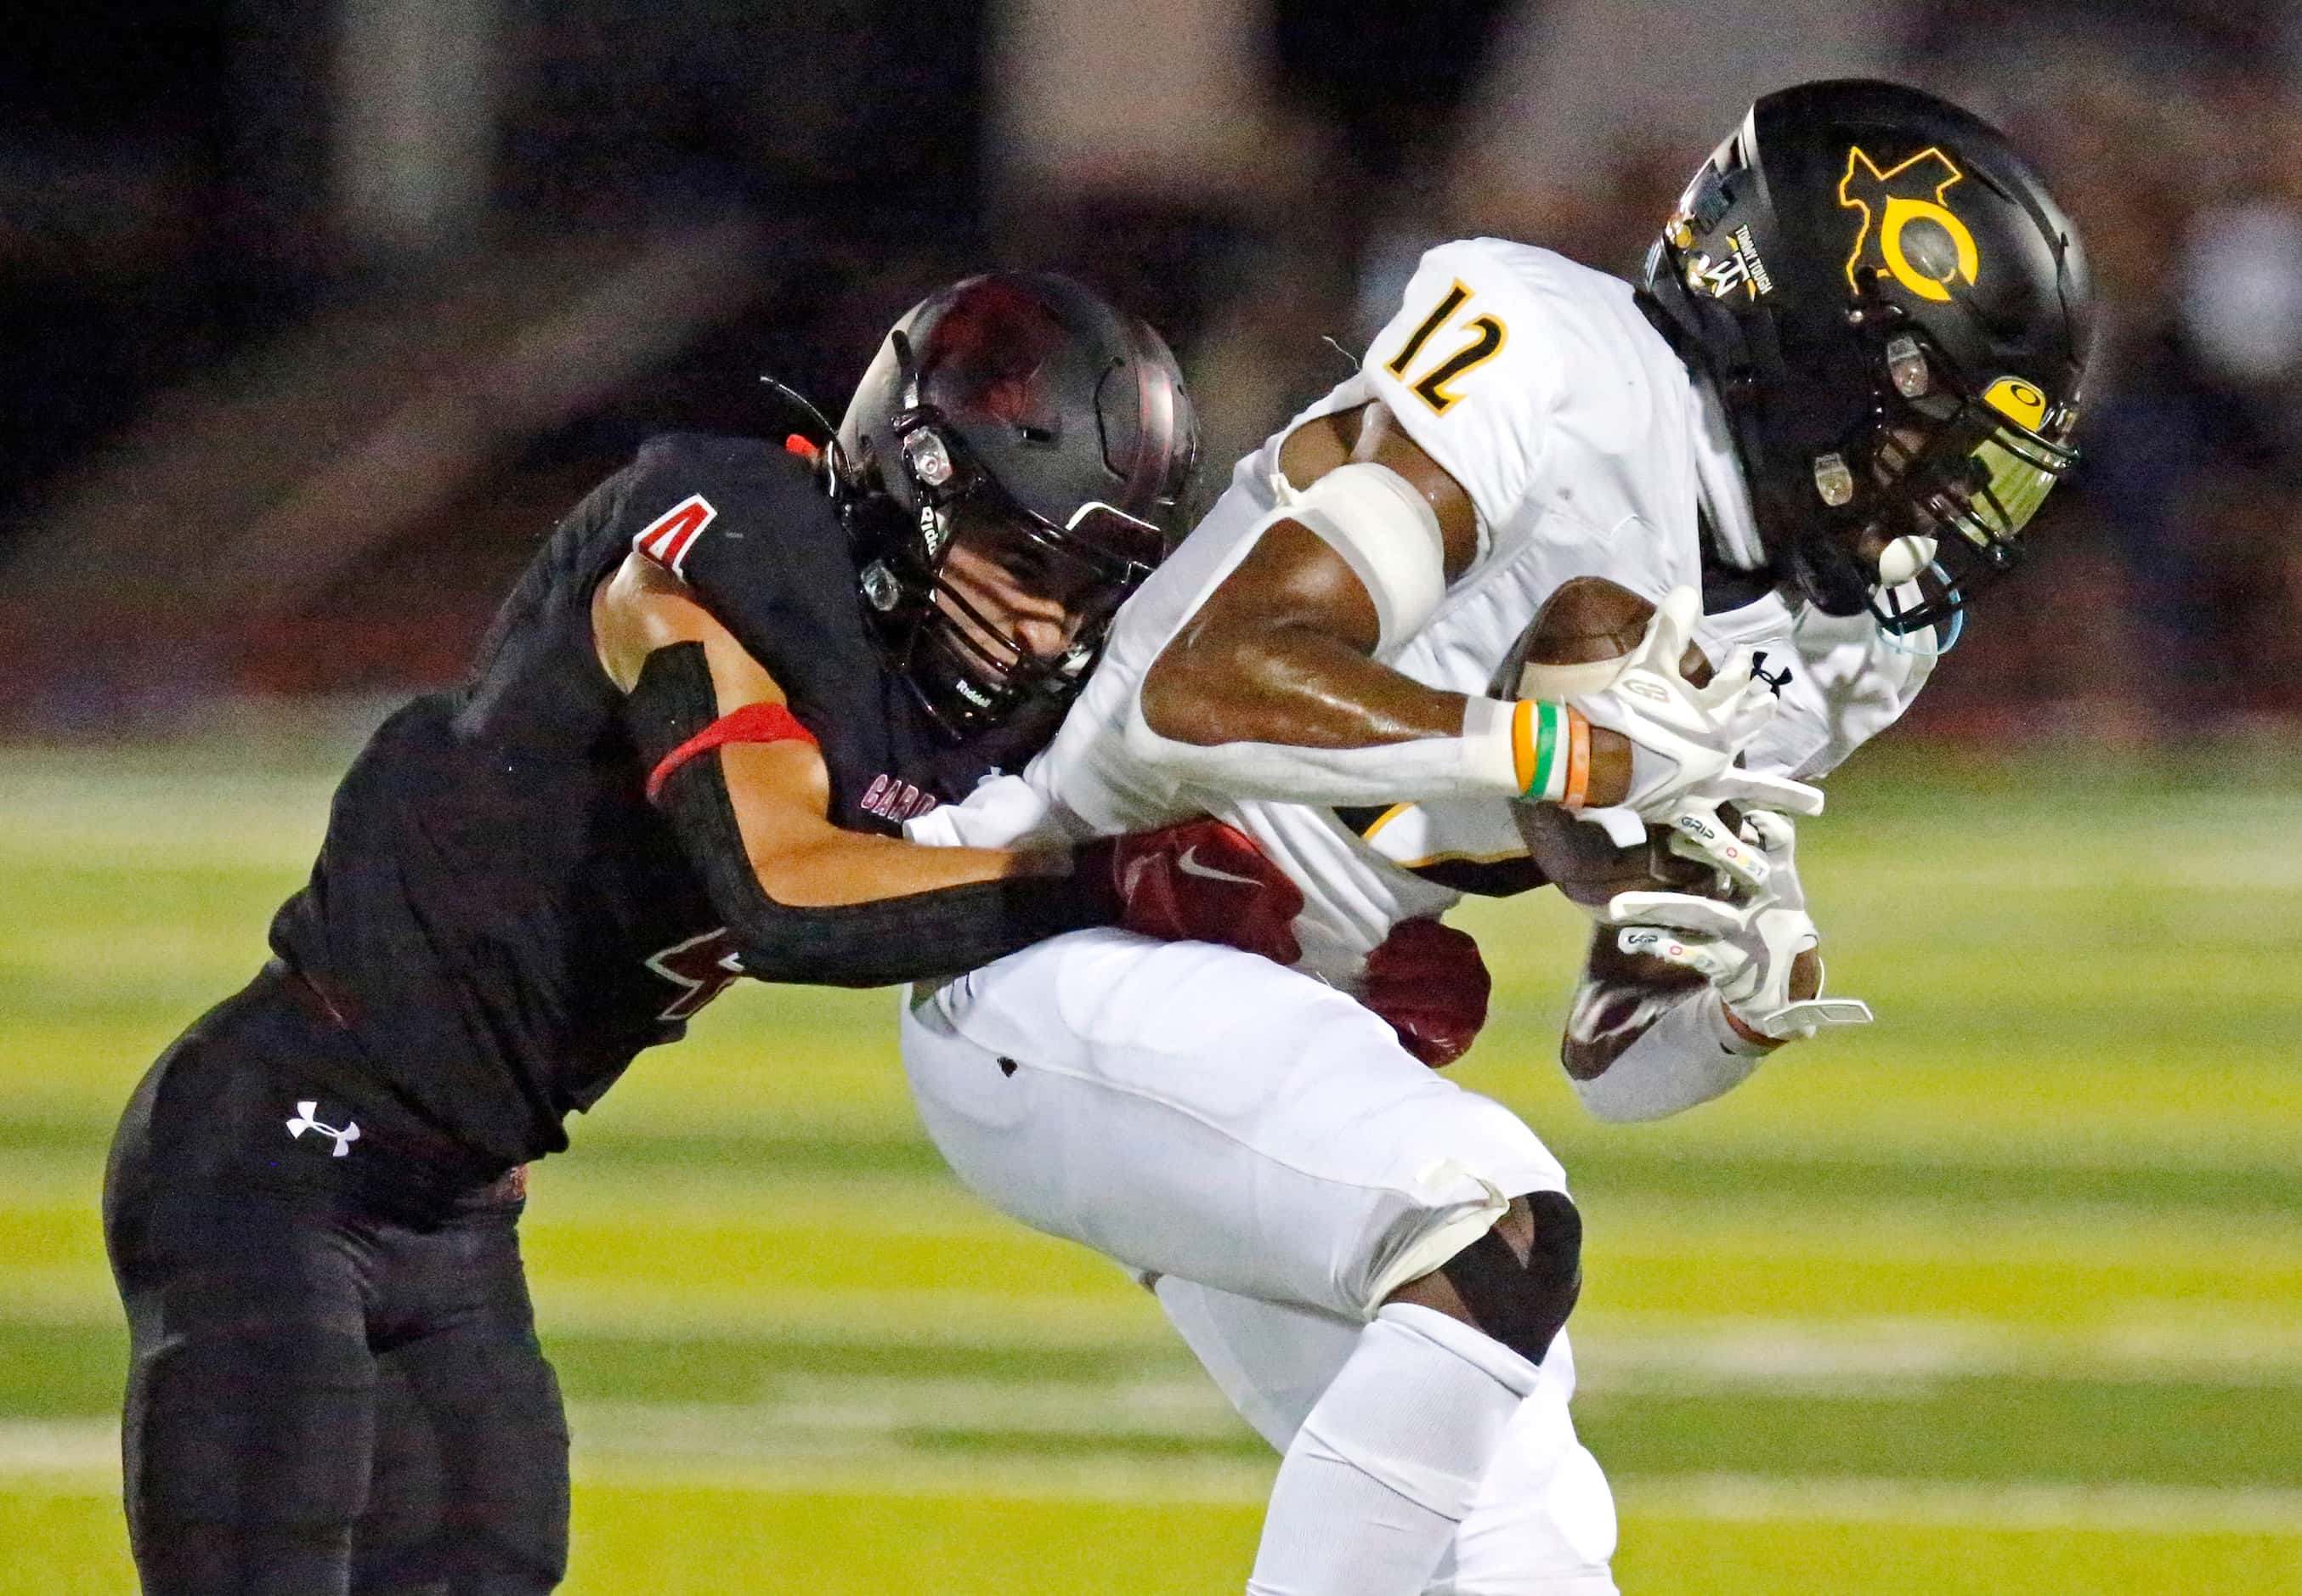 Crandall High School wide receiver Joshua Smith (12) is tackled by Melissa High School...